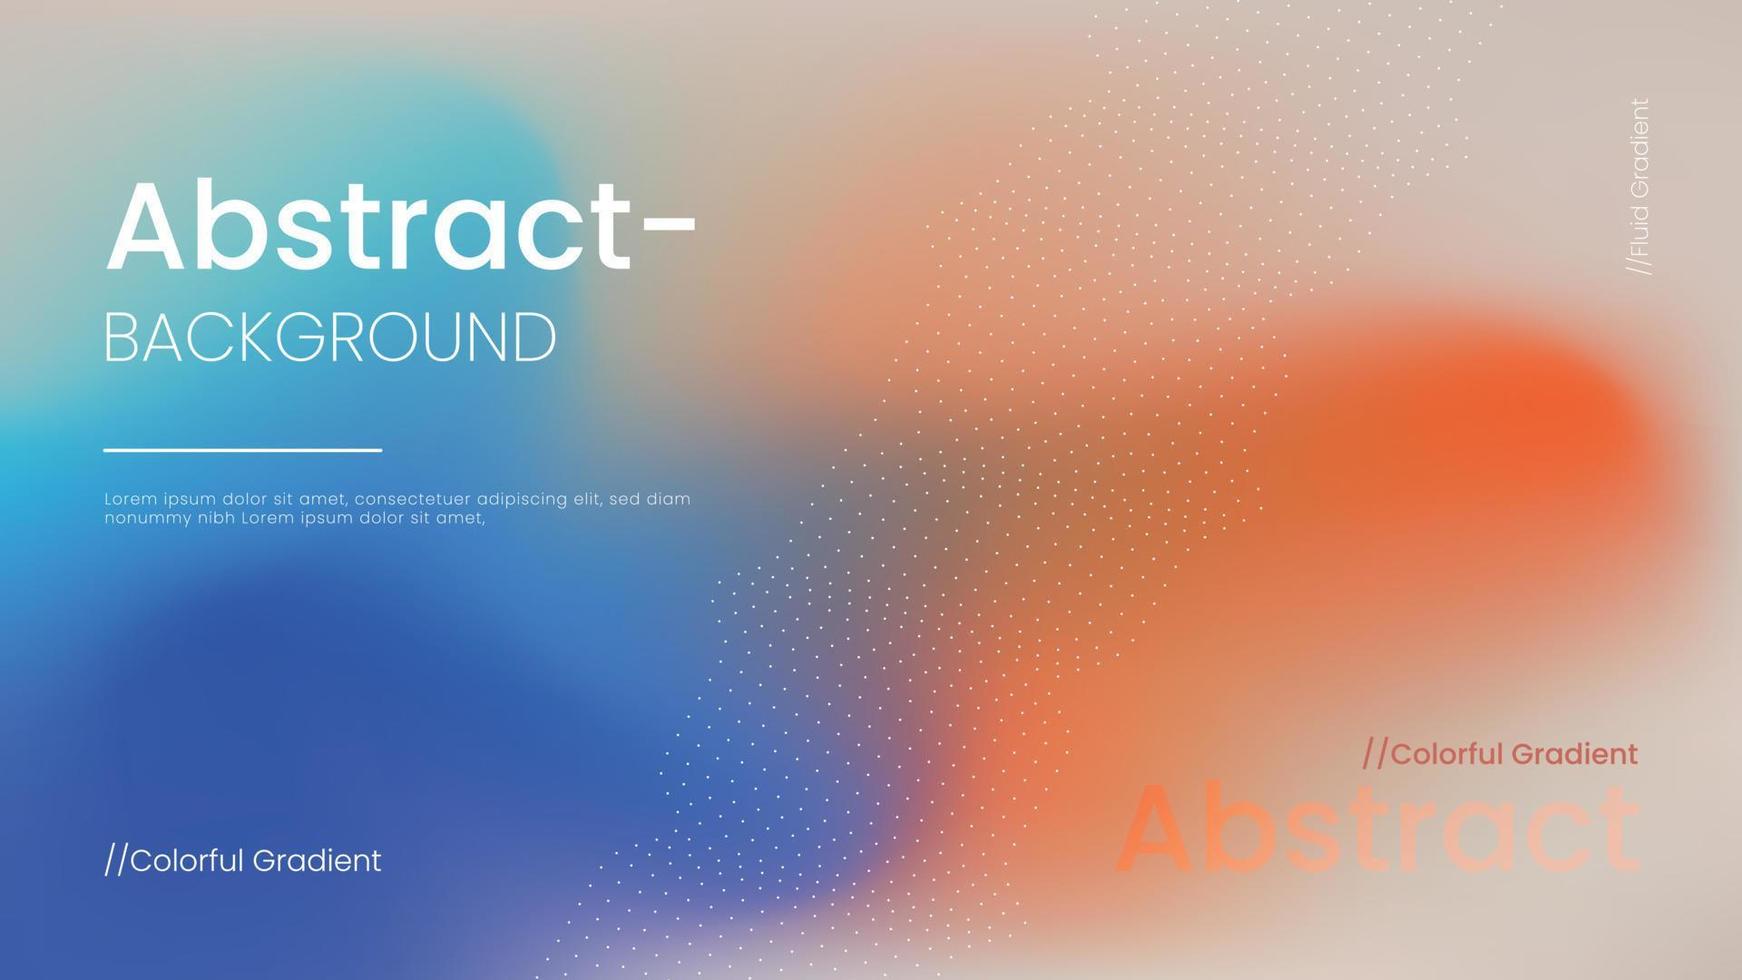 Abstract background with blue and red blurred gradientsAbstract background with blue and red blurred gradients vector